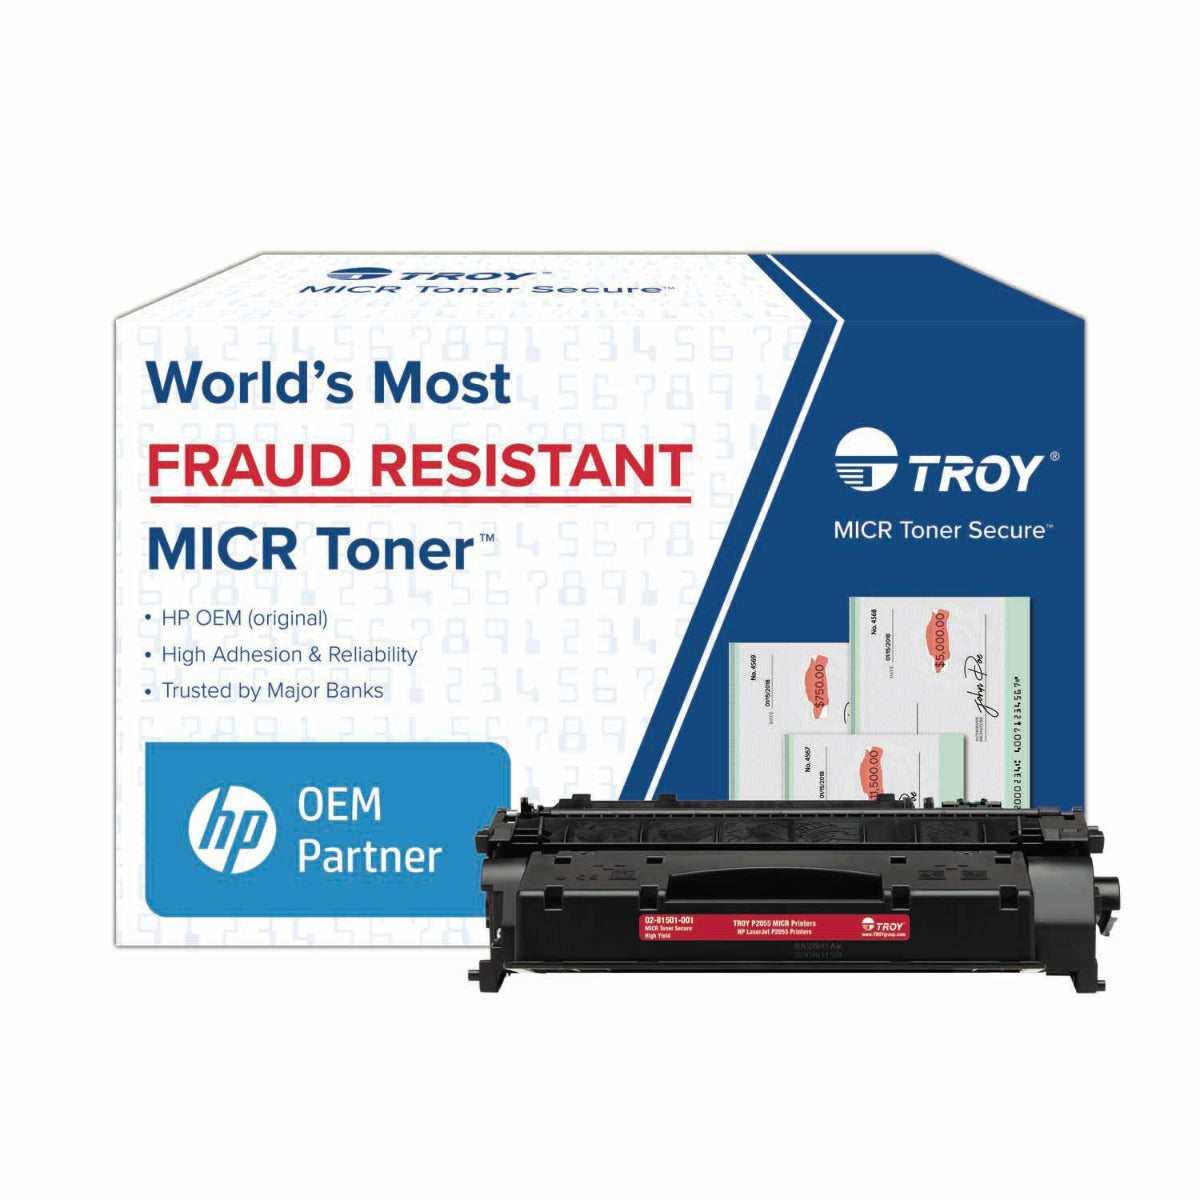 TROY P2055 MICR Toner Secure High Yield Cartridge (Coordinating HP Part Number: CE505X)